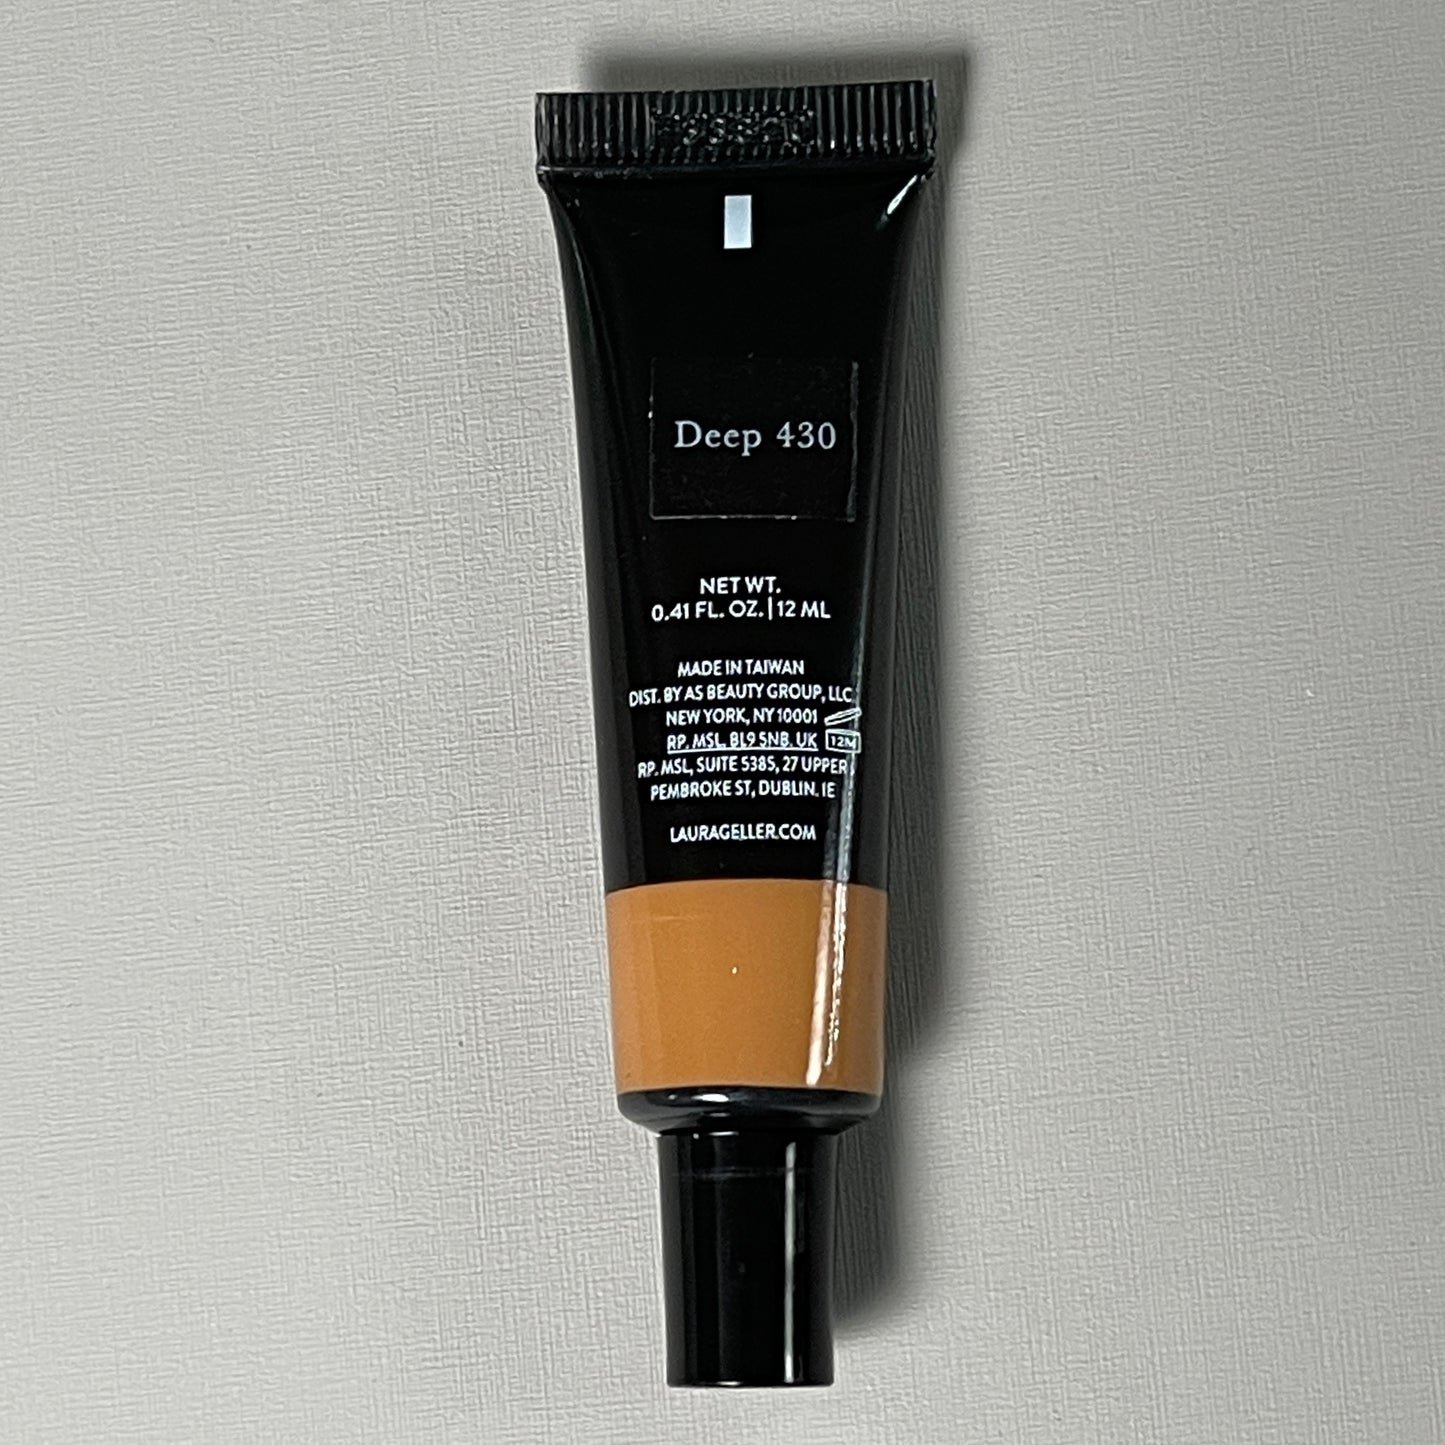 LAURA GELLER The Real Deal Concealer with Brush 0.41 fl oz Deep 430 (New)